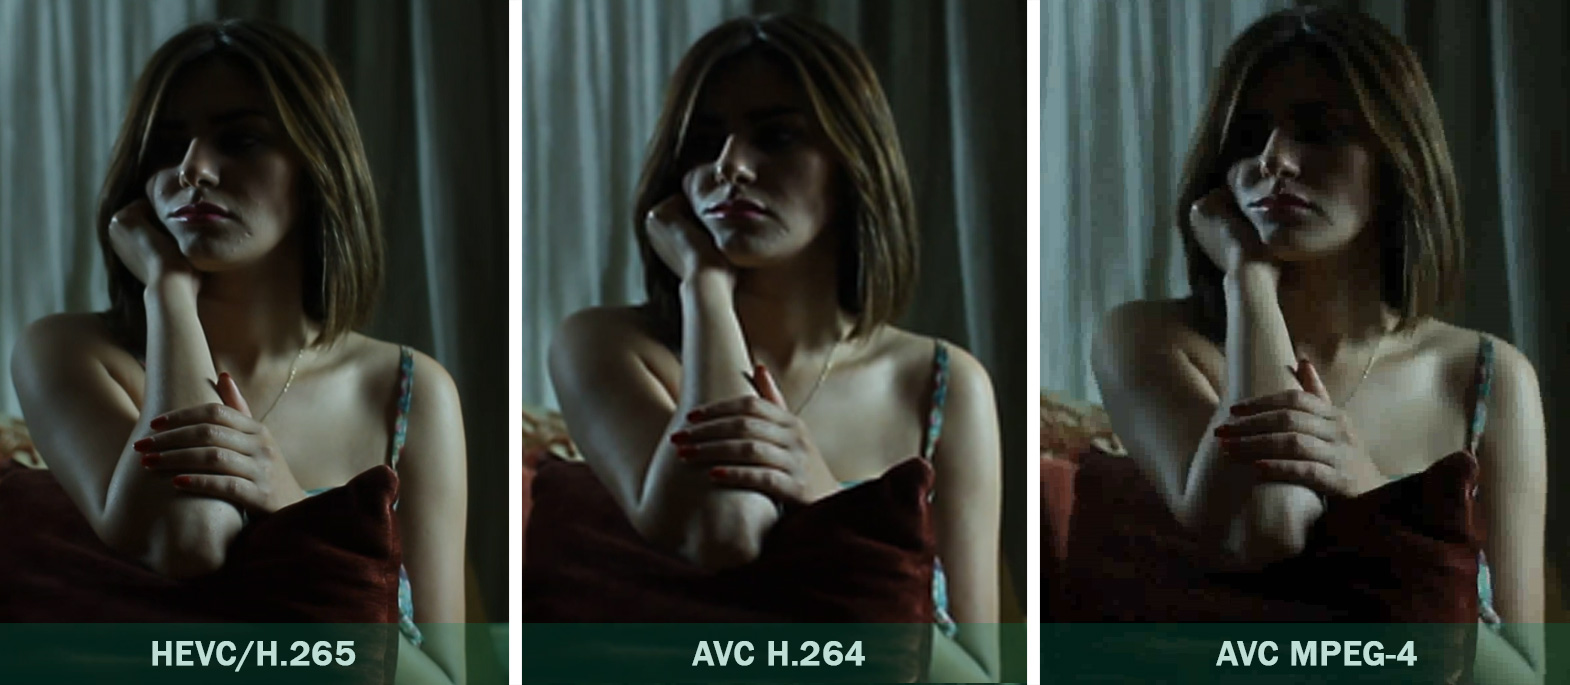 comparison between HEVC , AVC H.264 and AVC MPEG-4